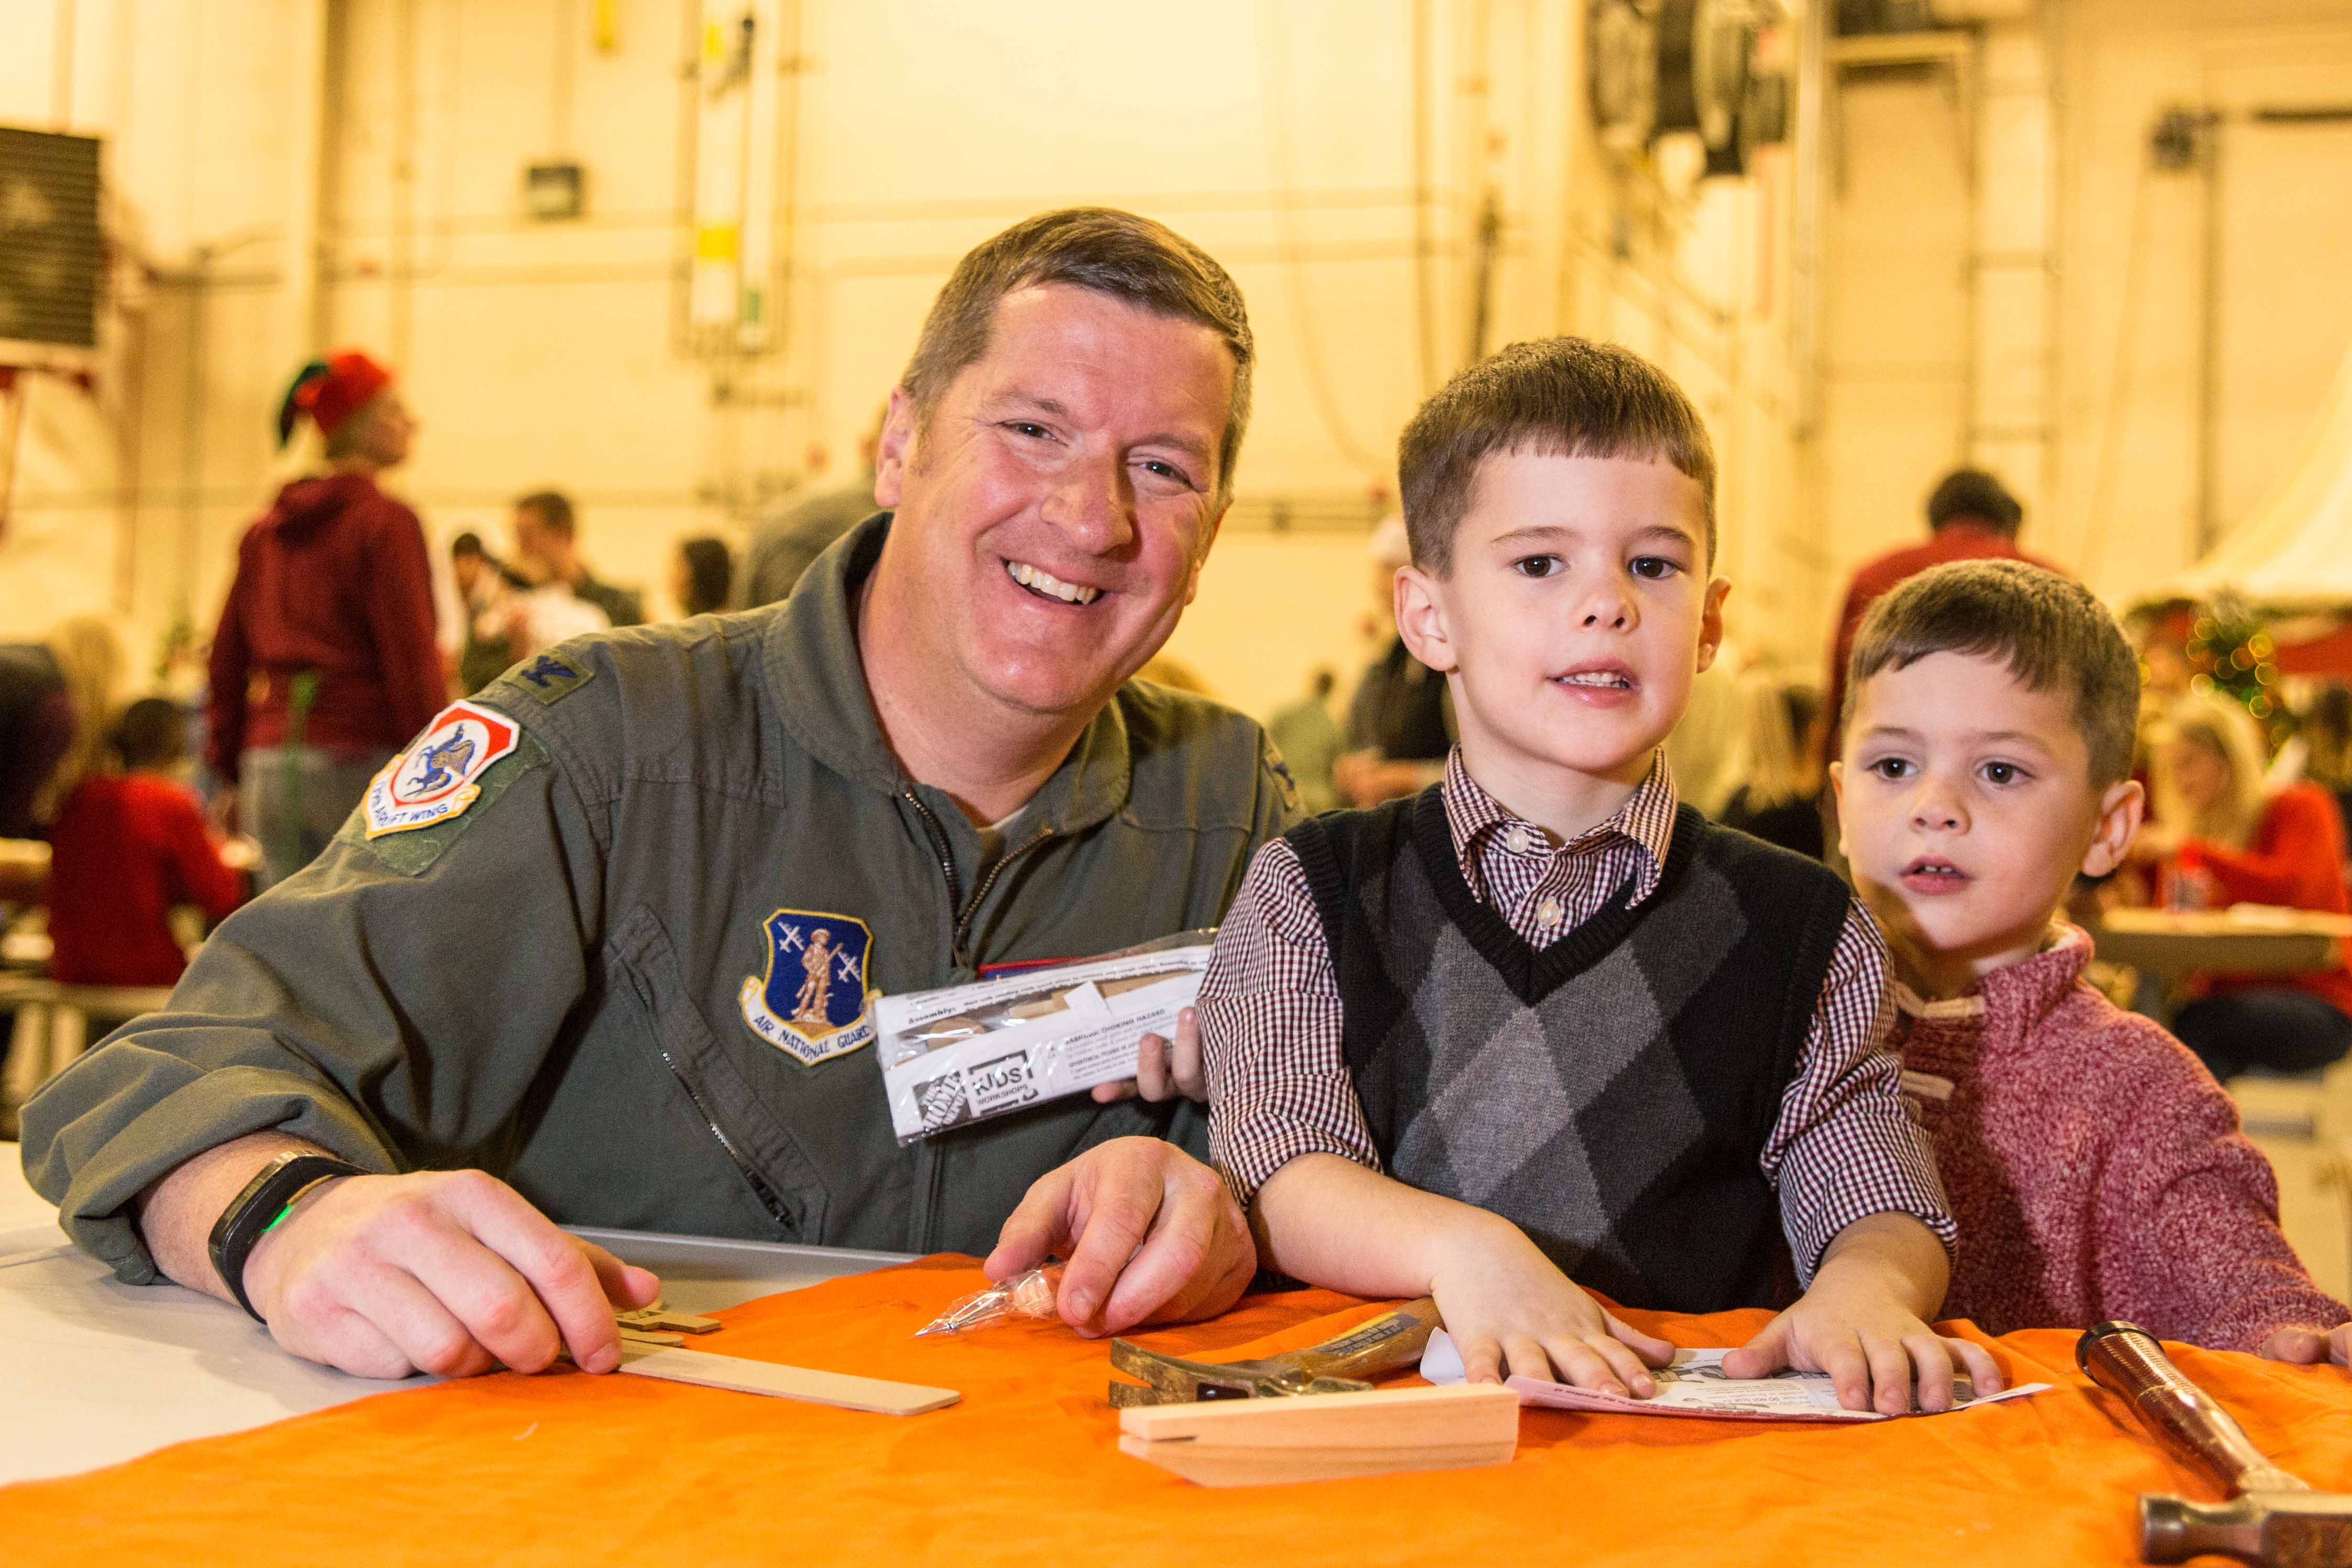 Airmen Celebrate The Holidays With Their Families